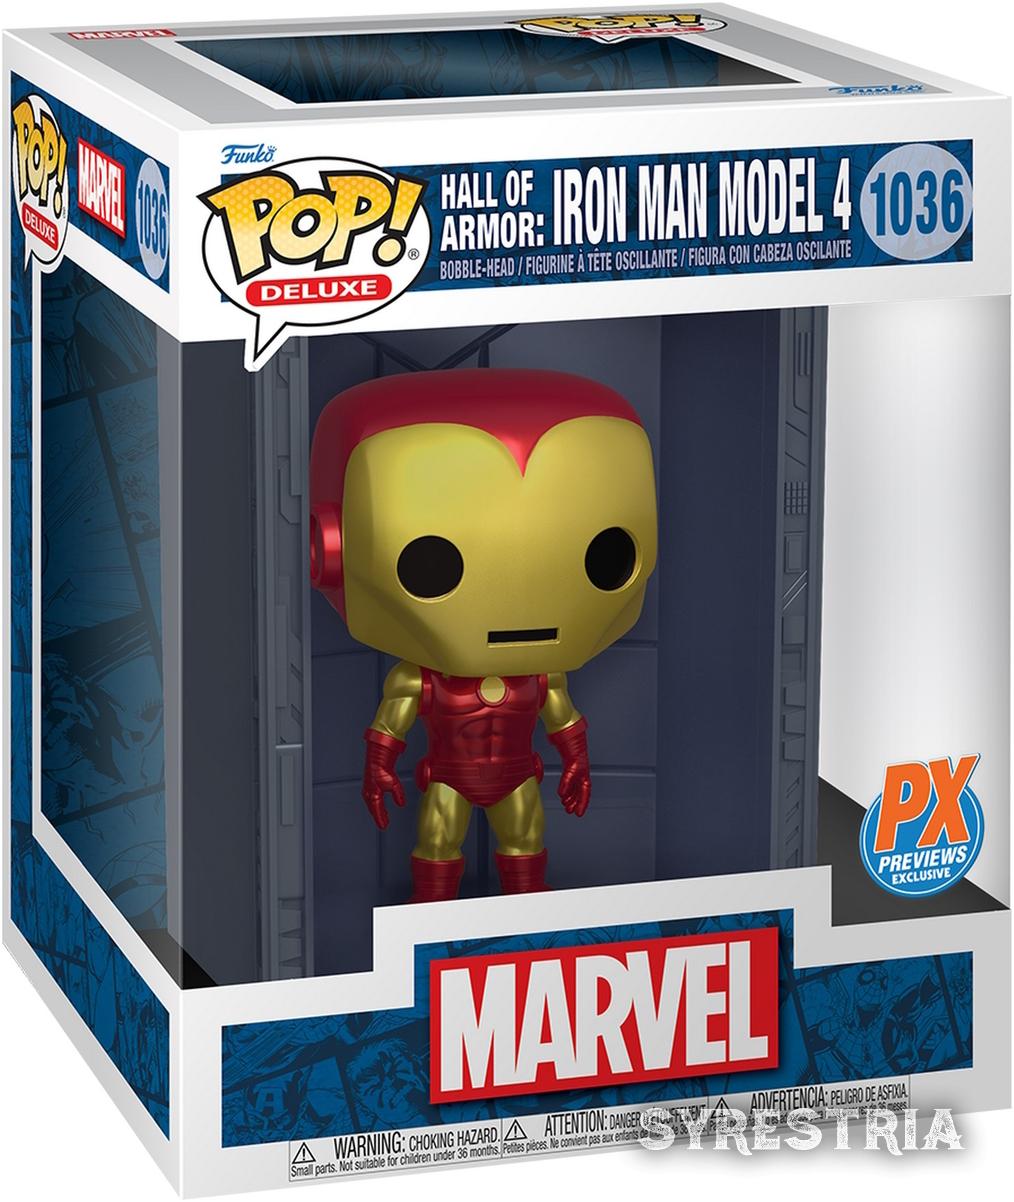 Marvel - Hall Of Armor Iron Man Model 4 1036 PX Previews Exclusive - Funko Pop! Deluxe